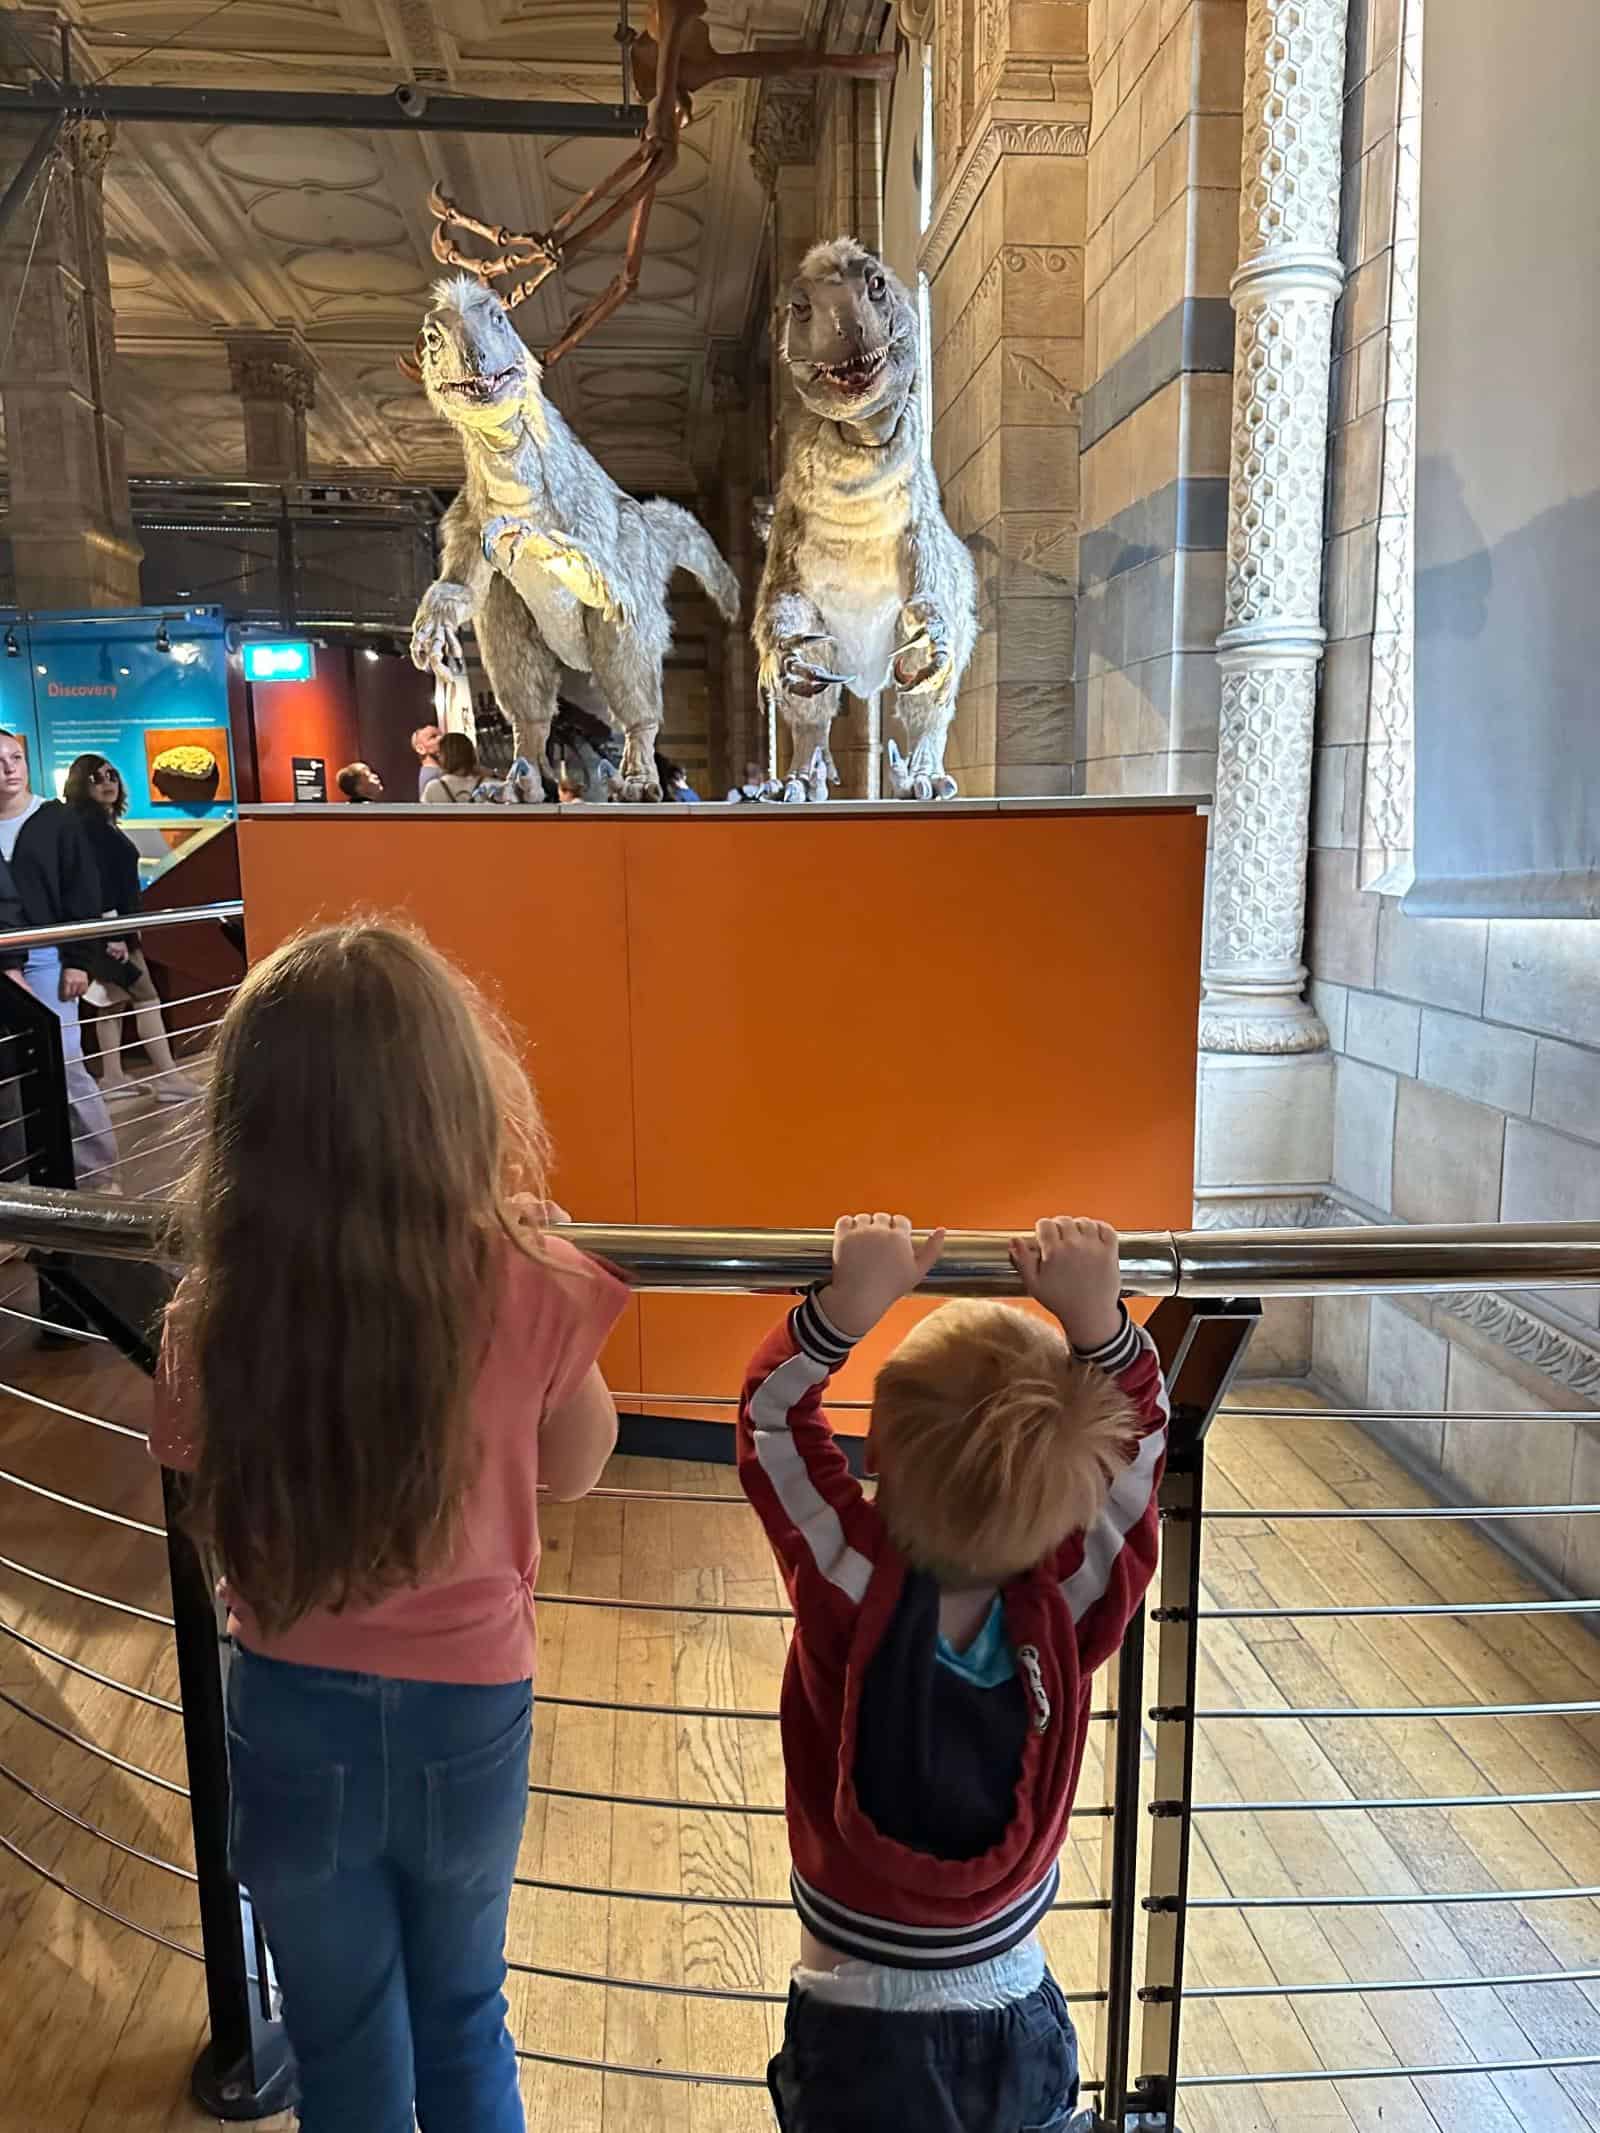 Two children (older girl and toddler boy) looking at two animatronic dinosaurs at the natural history museum in London